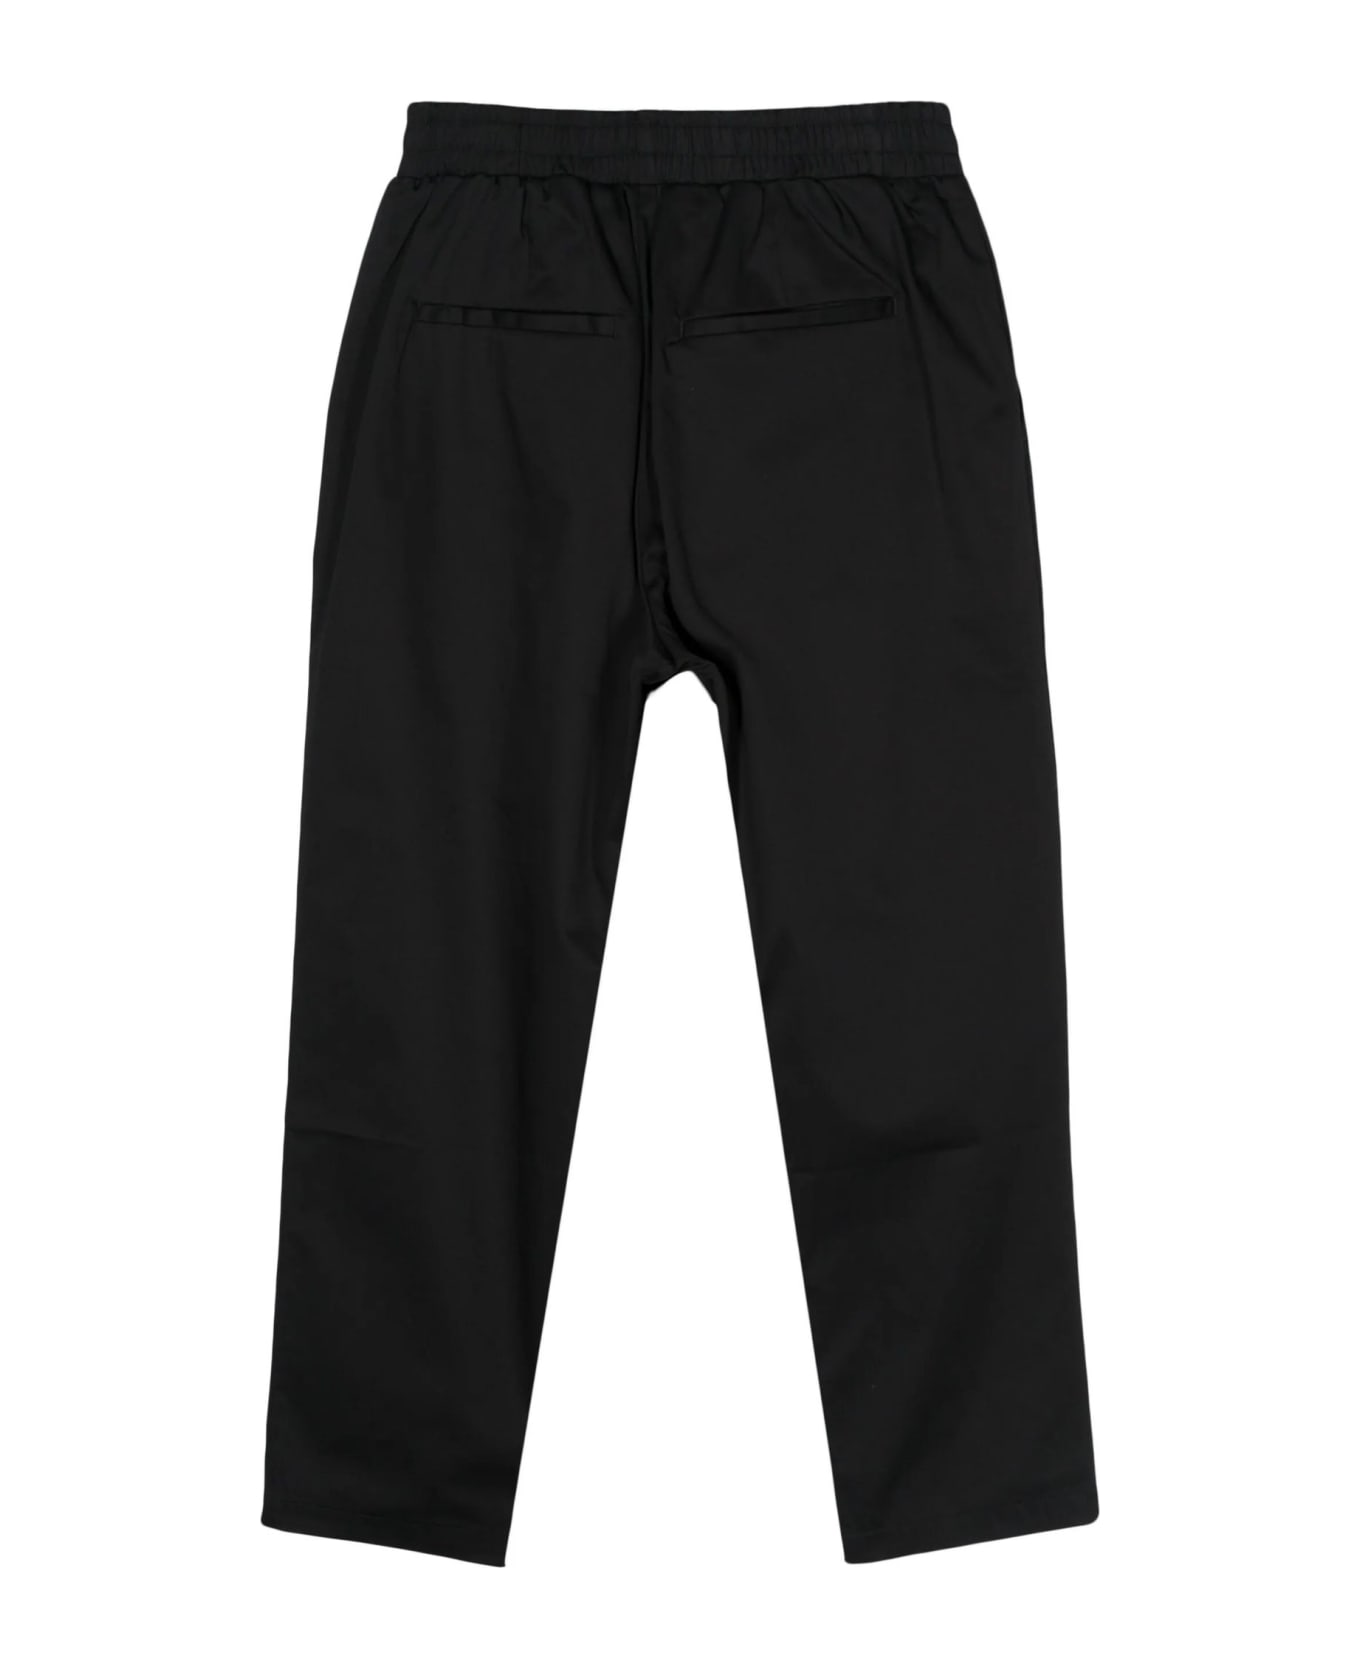 Family First Milano Black Stretch-cotton Trousers - BLACK